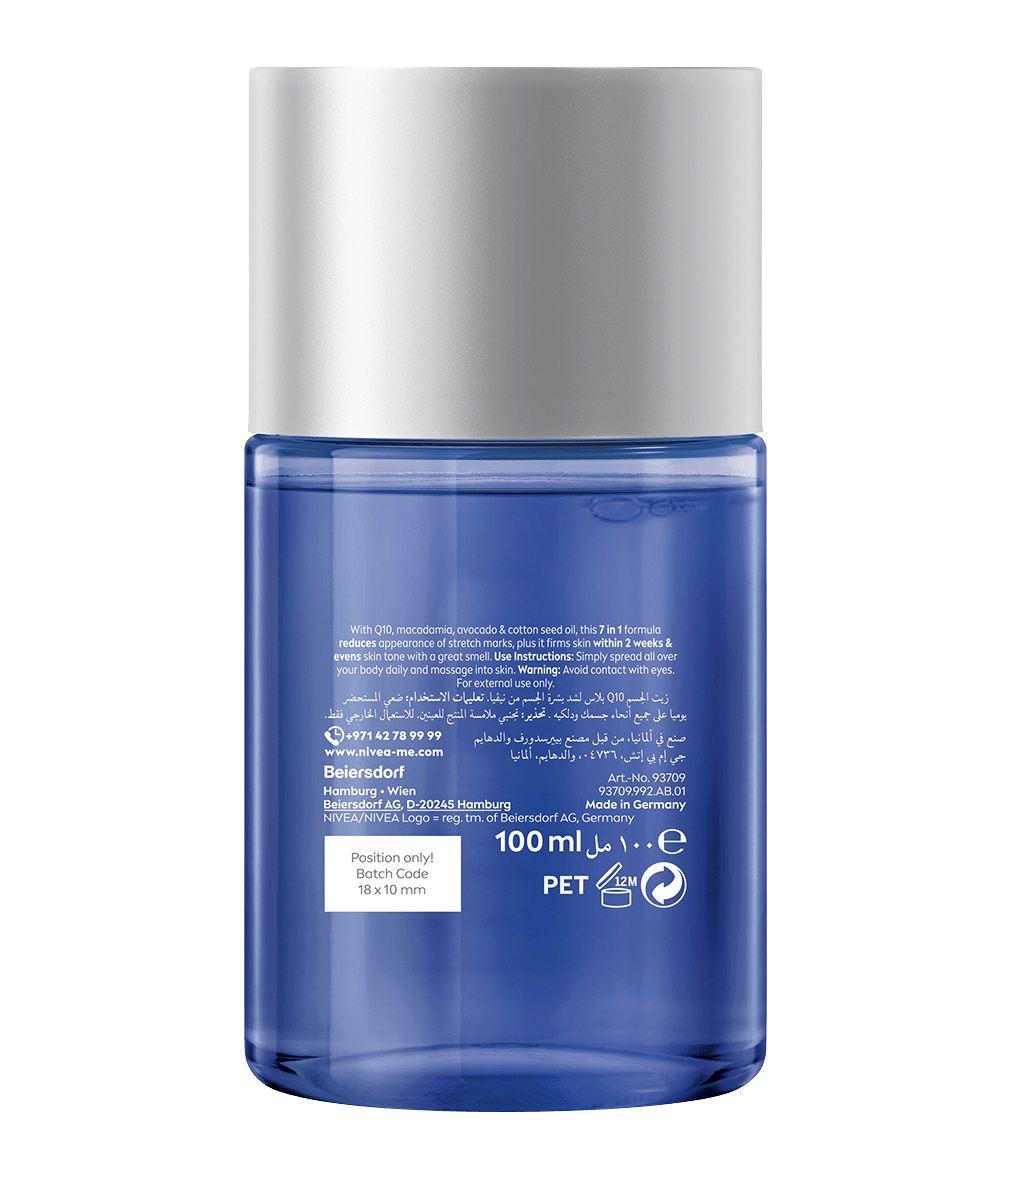 93709 Nivea Body Q10 Firming and Even Oil local clean back packshot